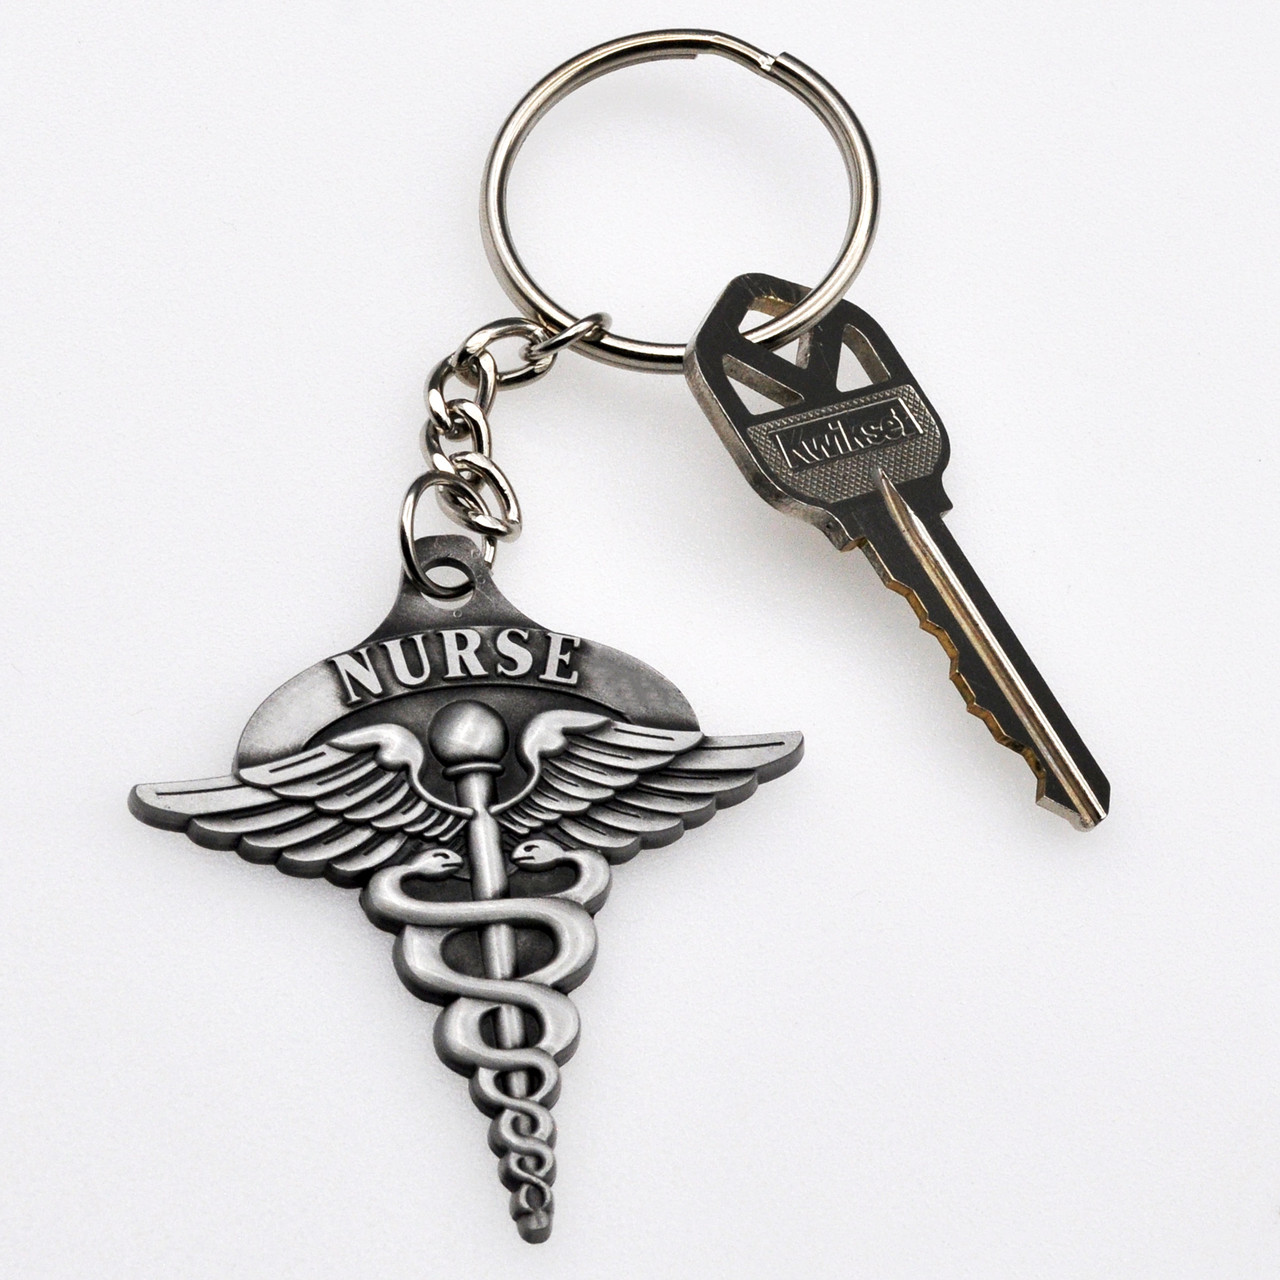 https://cdn11.bigcommerce.com/s-k4as3uan8i/images/stencil/1280x1280/products/146/5321/2301-113-Pewter-Nurse-Caduceus-Symbol-Keyring-with-Chain-key__85376.1627576801.jpg?c=1